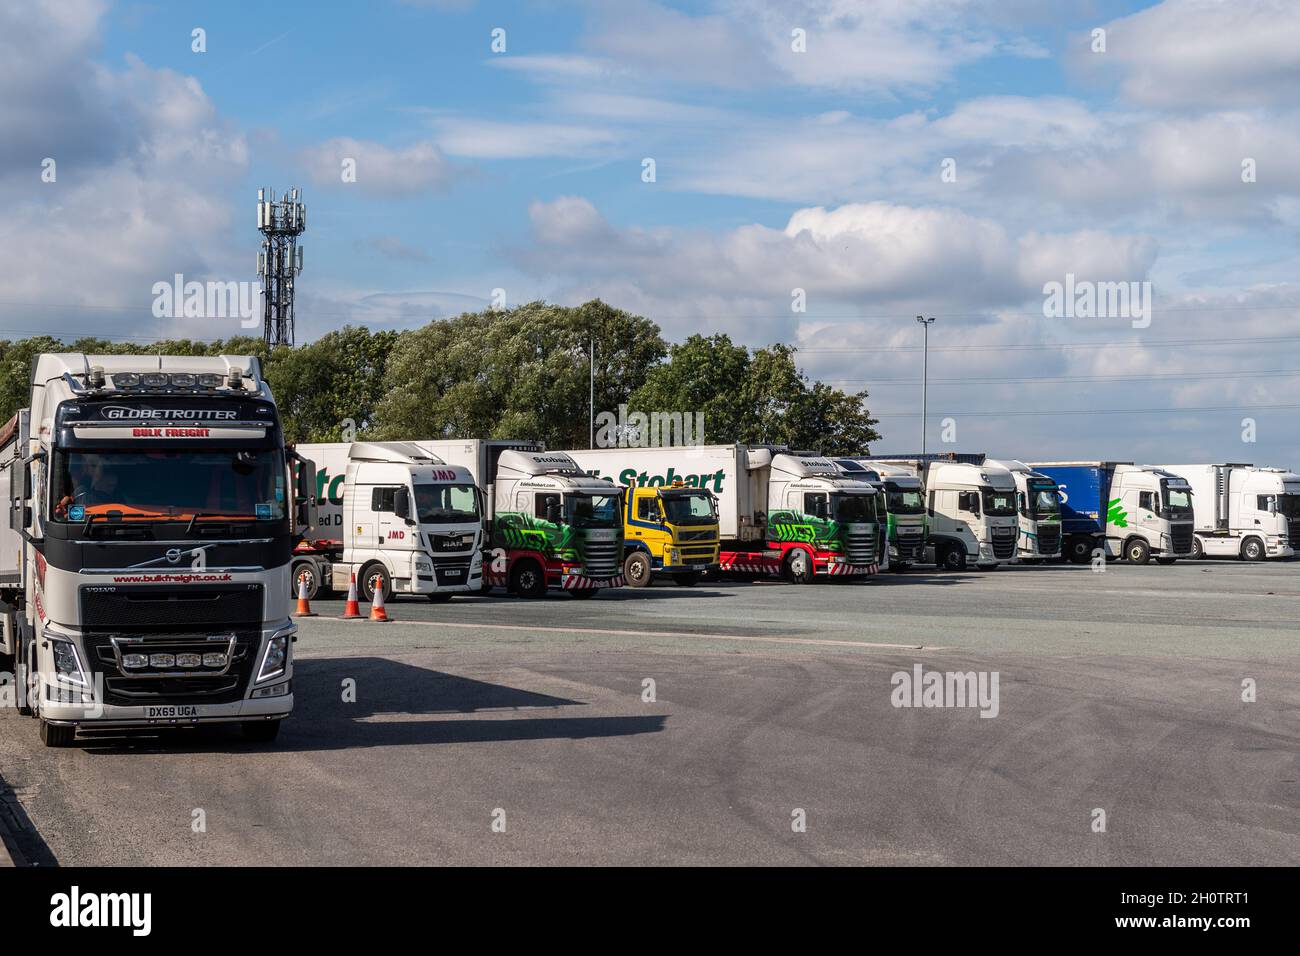 Burtonwood service station/truck stop on the M62 Motorway in the UK. Stock Photo